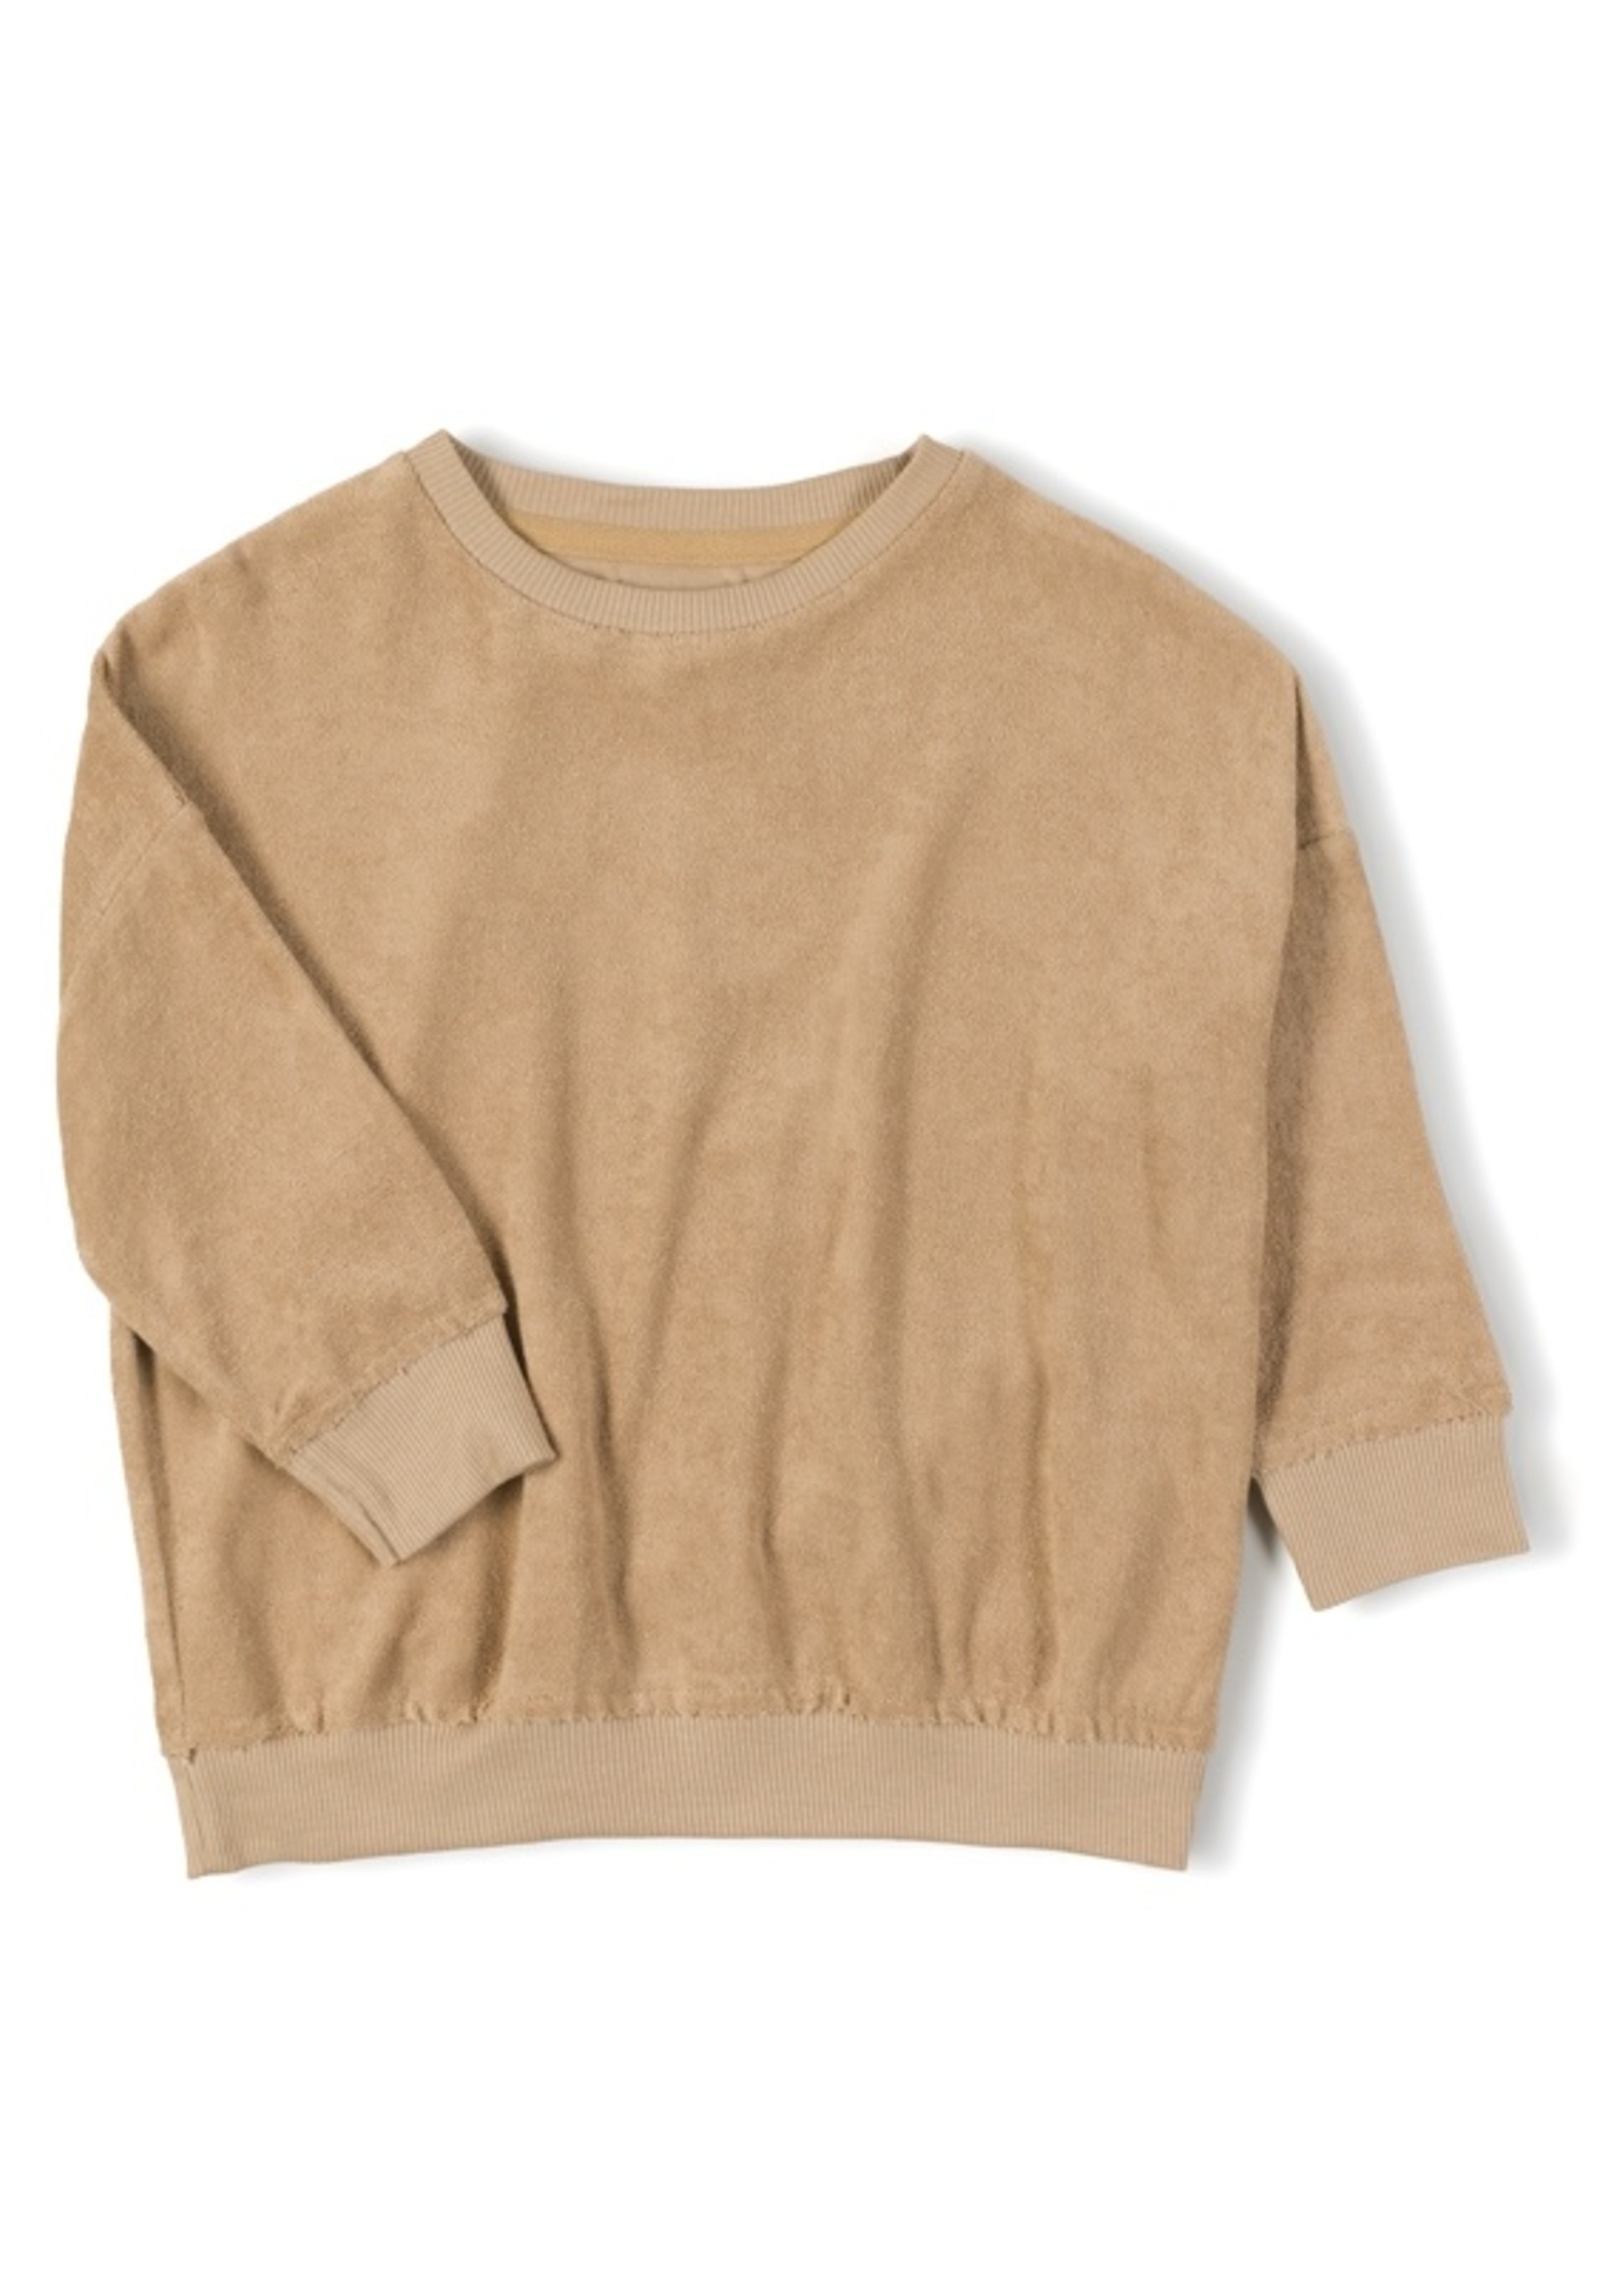 Nixnut Loose Sweater - Biscuit